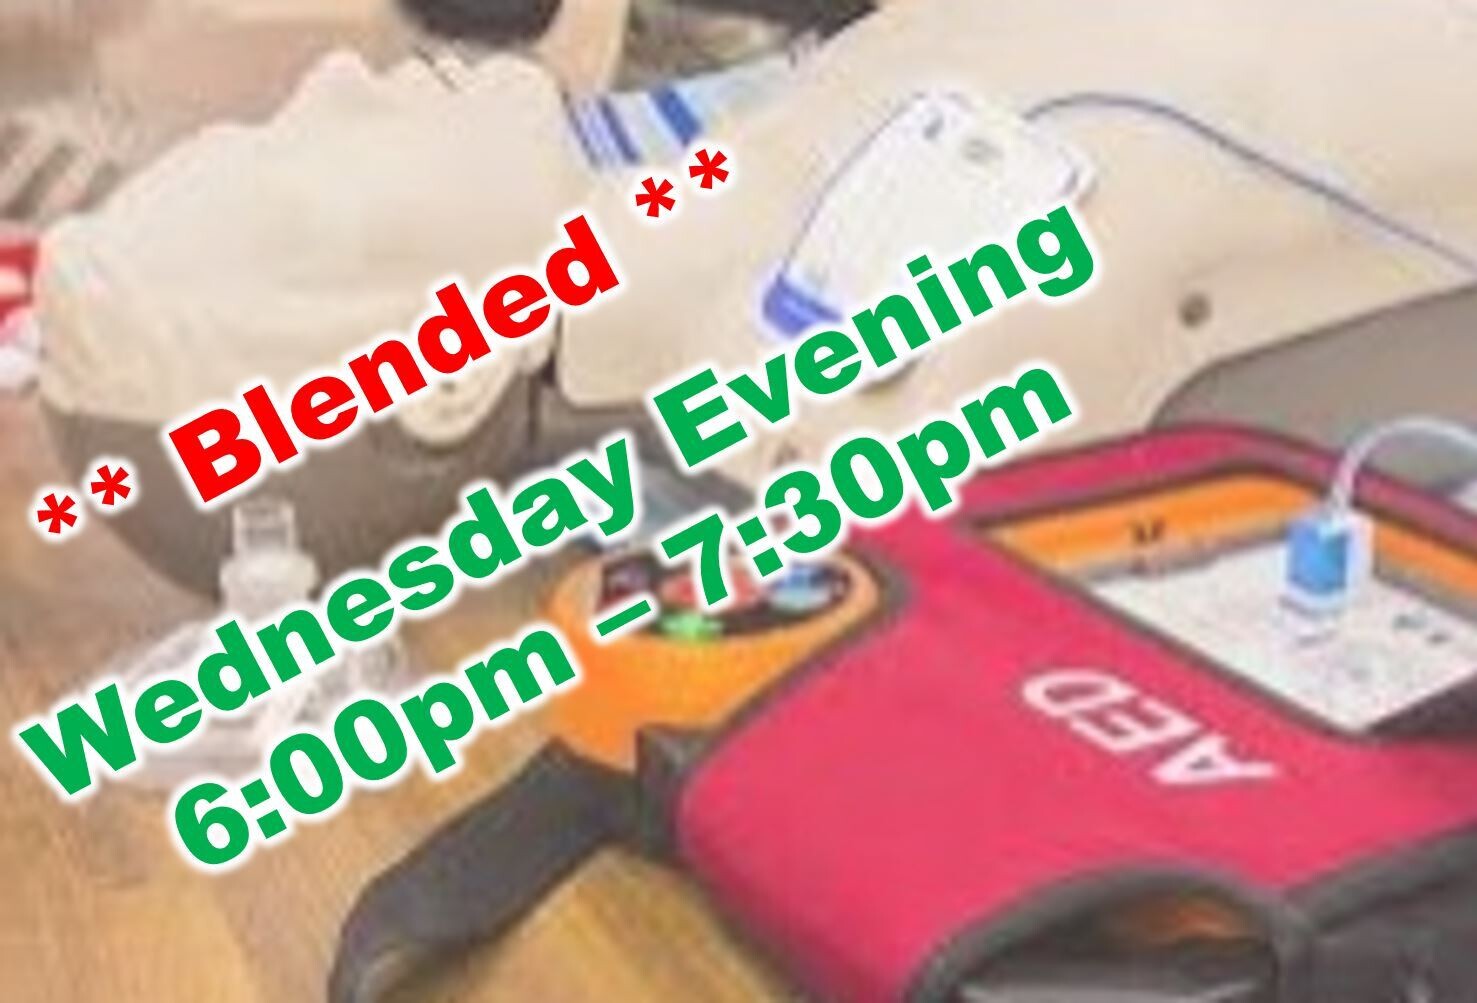 Feb. 15th, 2022 (Wednesday) 6:00pm-7:30pm CPR Class